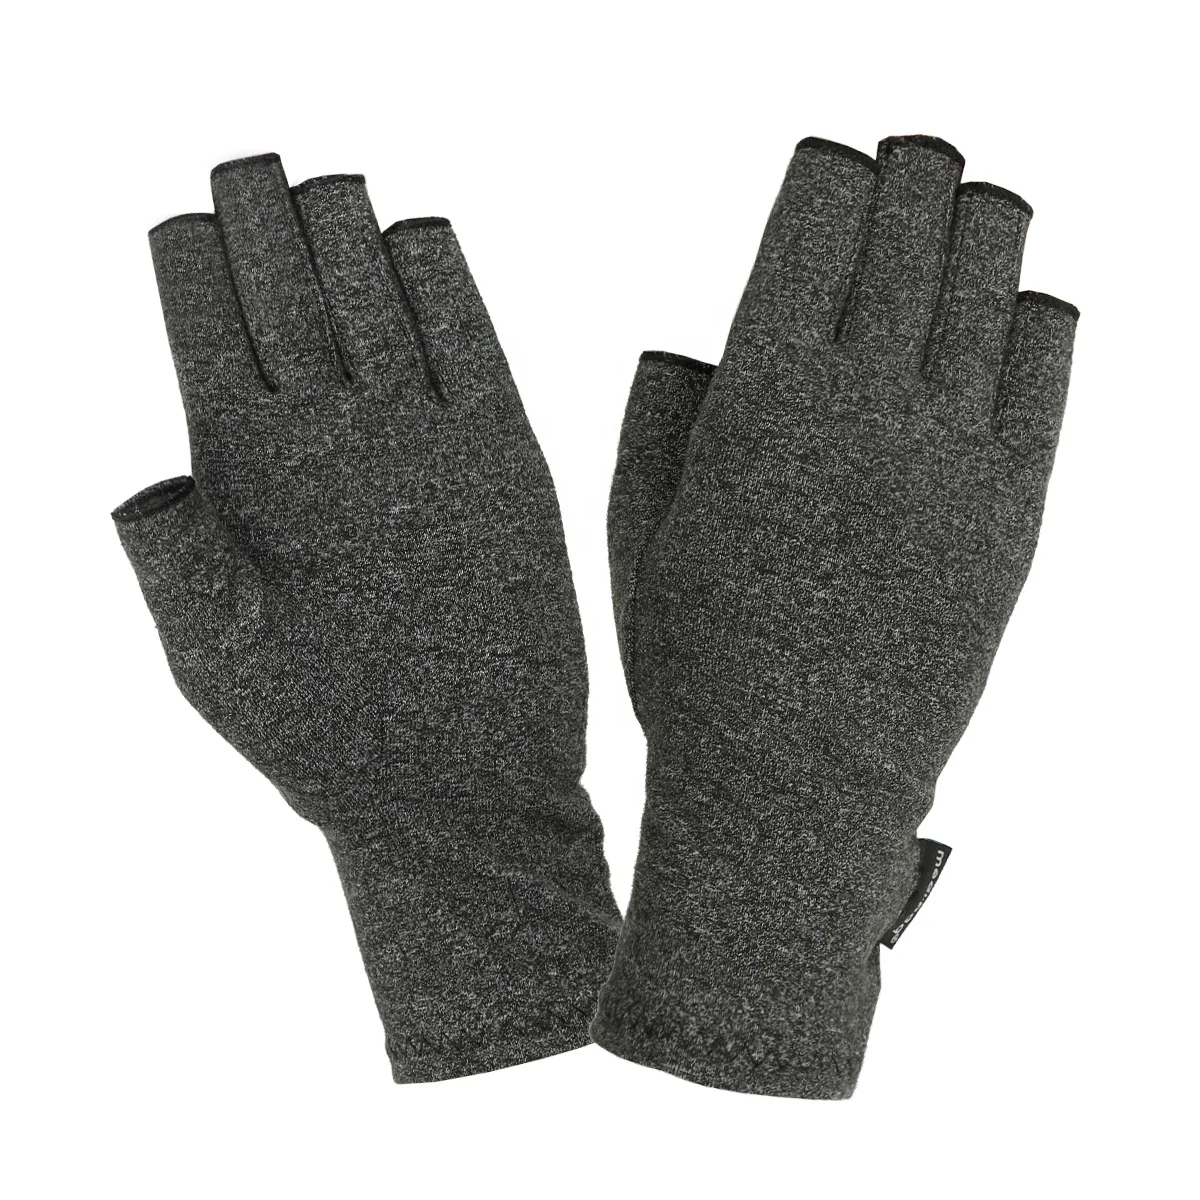 Anti-Arthritis Gloves (Paar) – Providing Warmth and Compression to Help Increase Circulation Reducing Pain and Promoting Healing